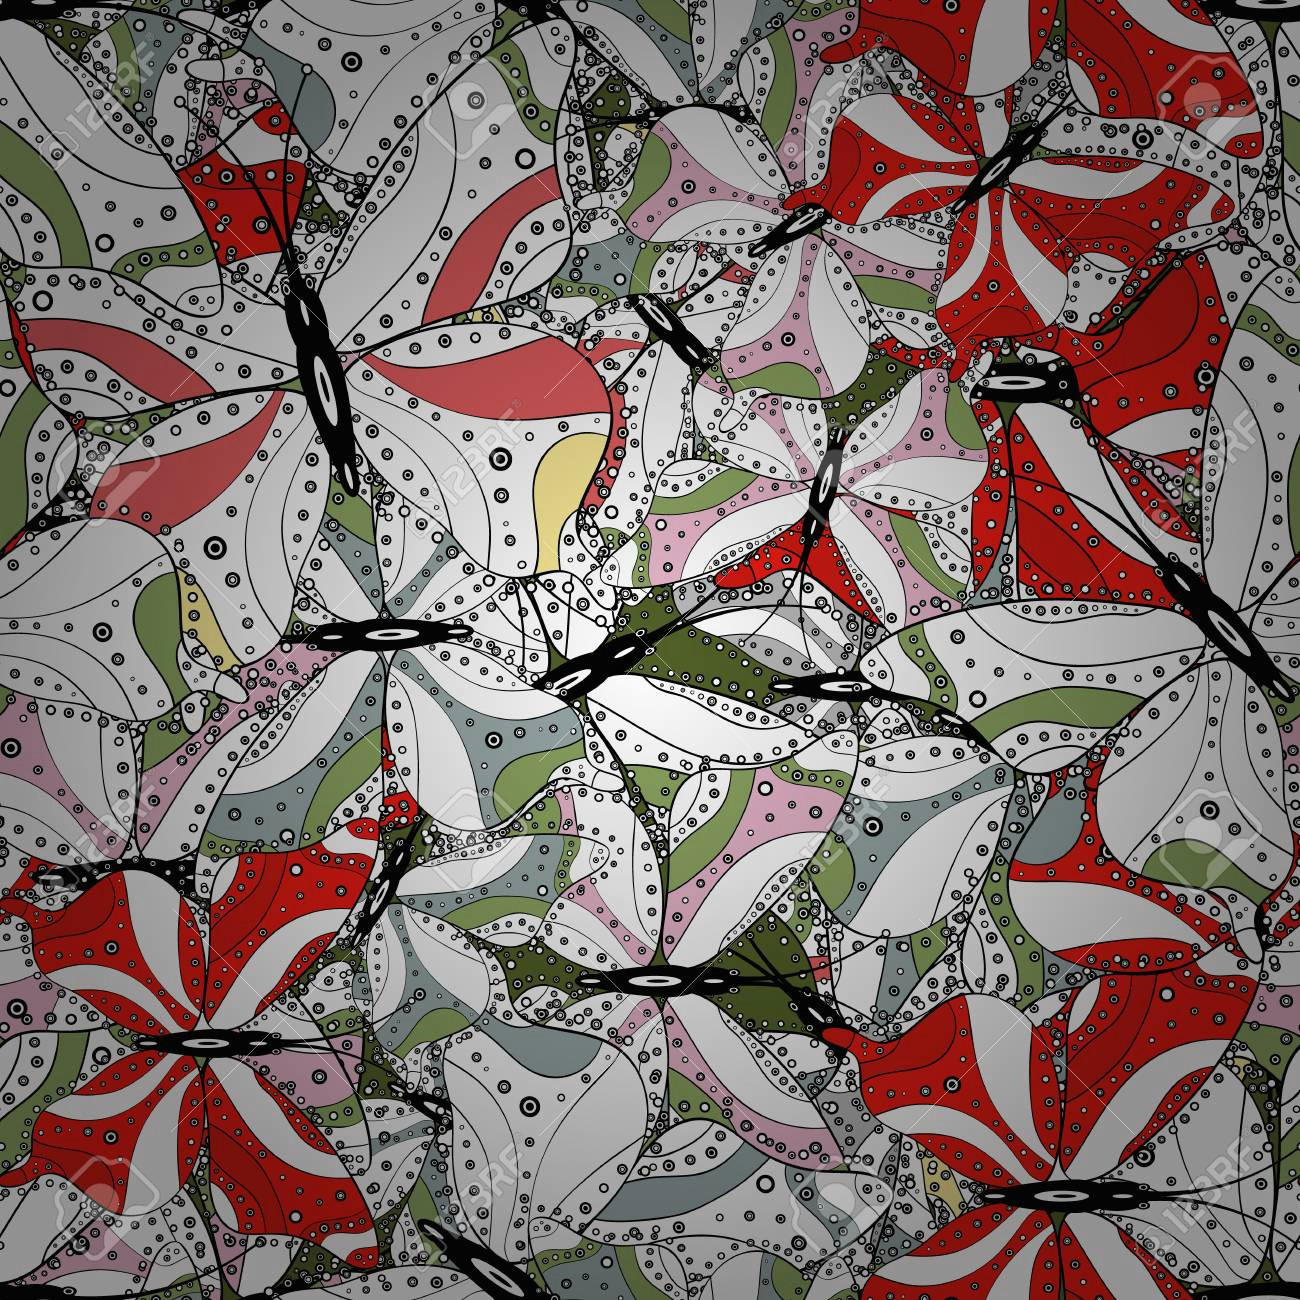 125302879 in simple style tropical butterfly seamless pattern in white black and red colors doodle sketch scri jpg